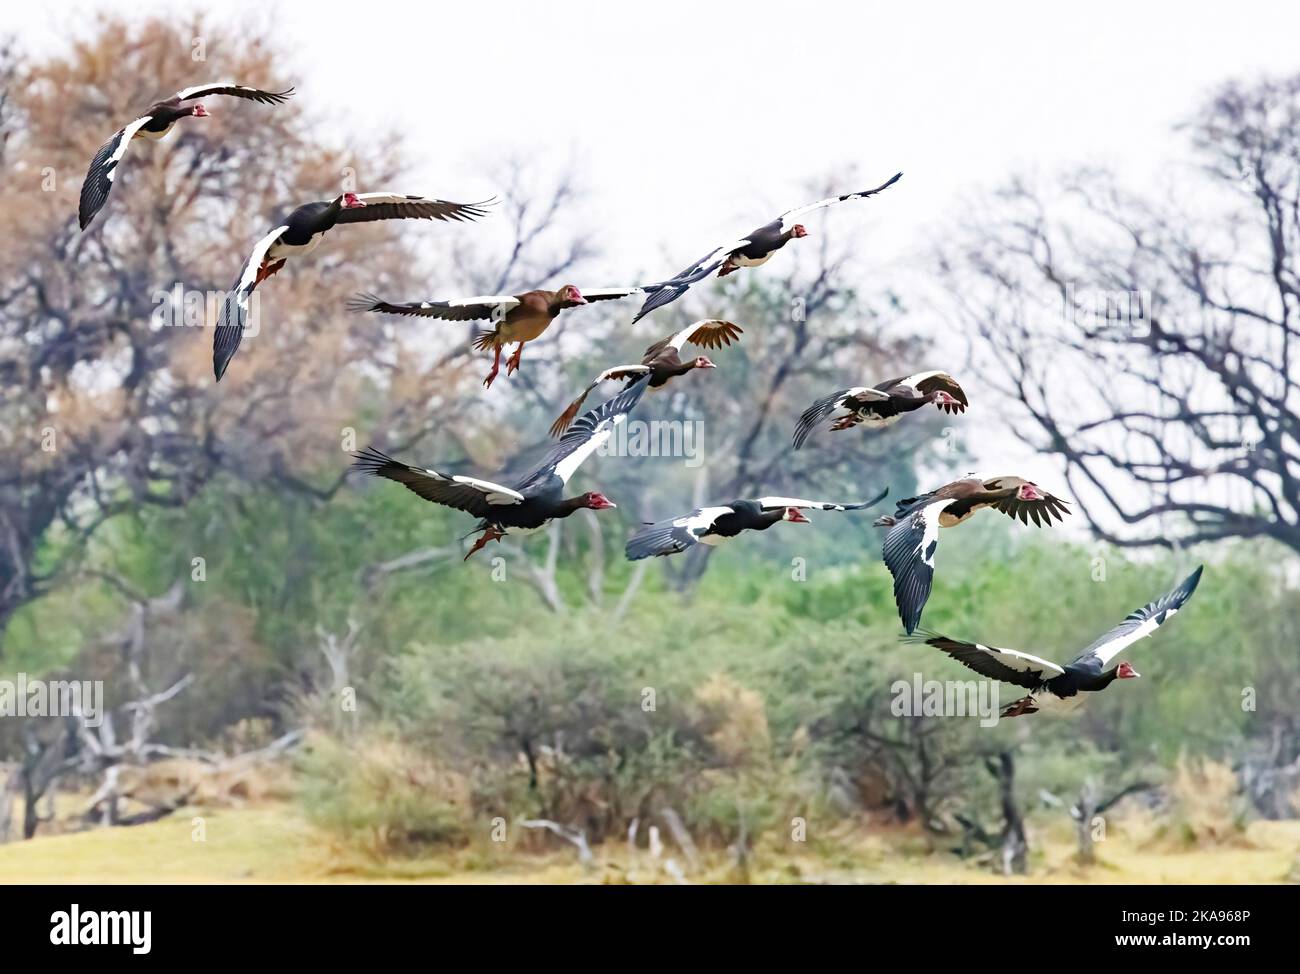 Spur winged goose, Plectropterus gambensis. A flock of Spur winged geese flying, Okavango Delta, Botswana Africa. African birds. Stock Photo